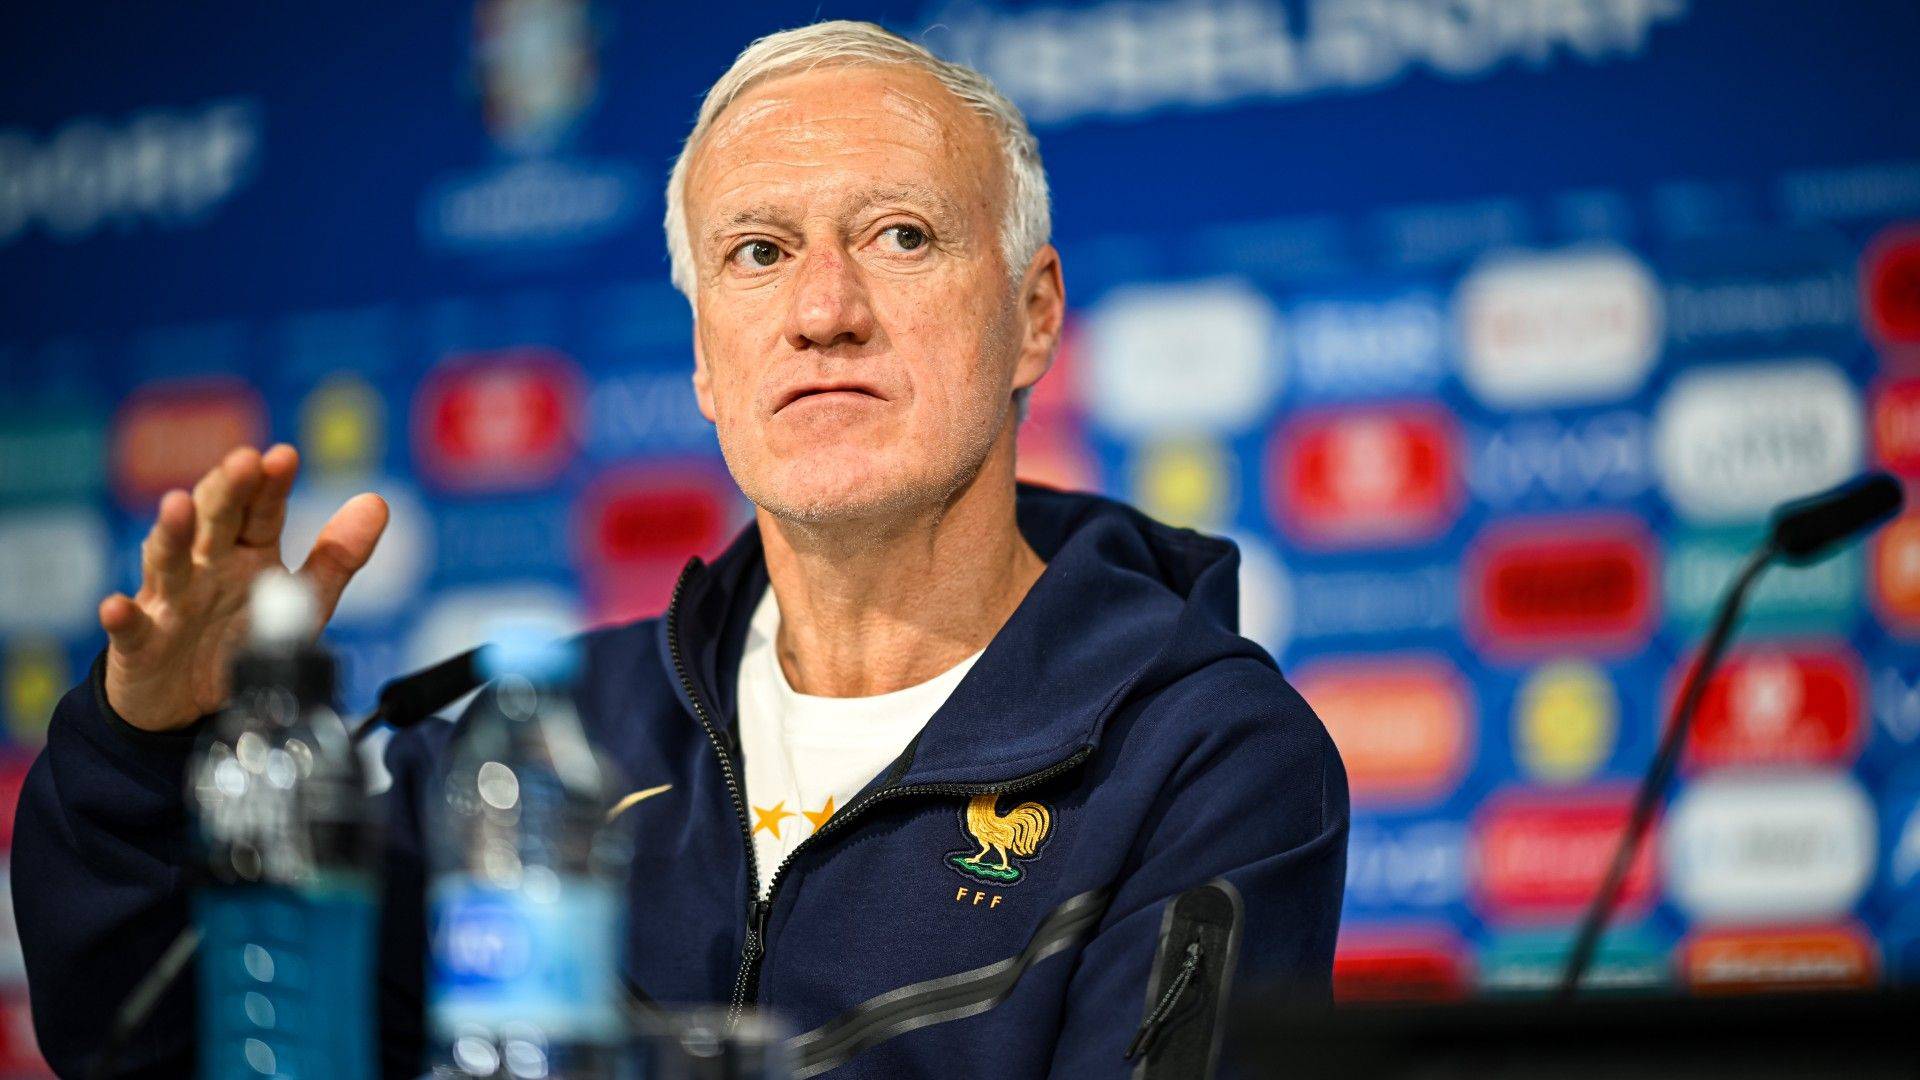 Deschamps: Parking the bus against the Netherlands is not the solution - We must dominate with possession to pressure them